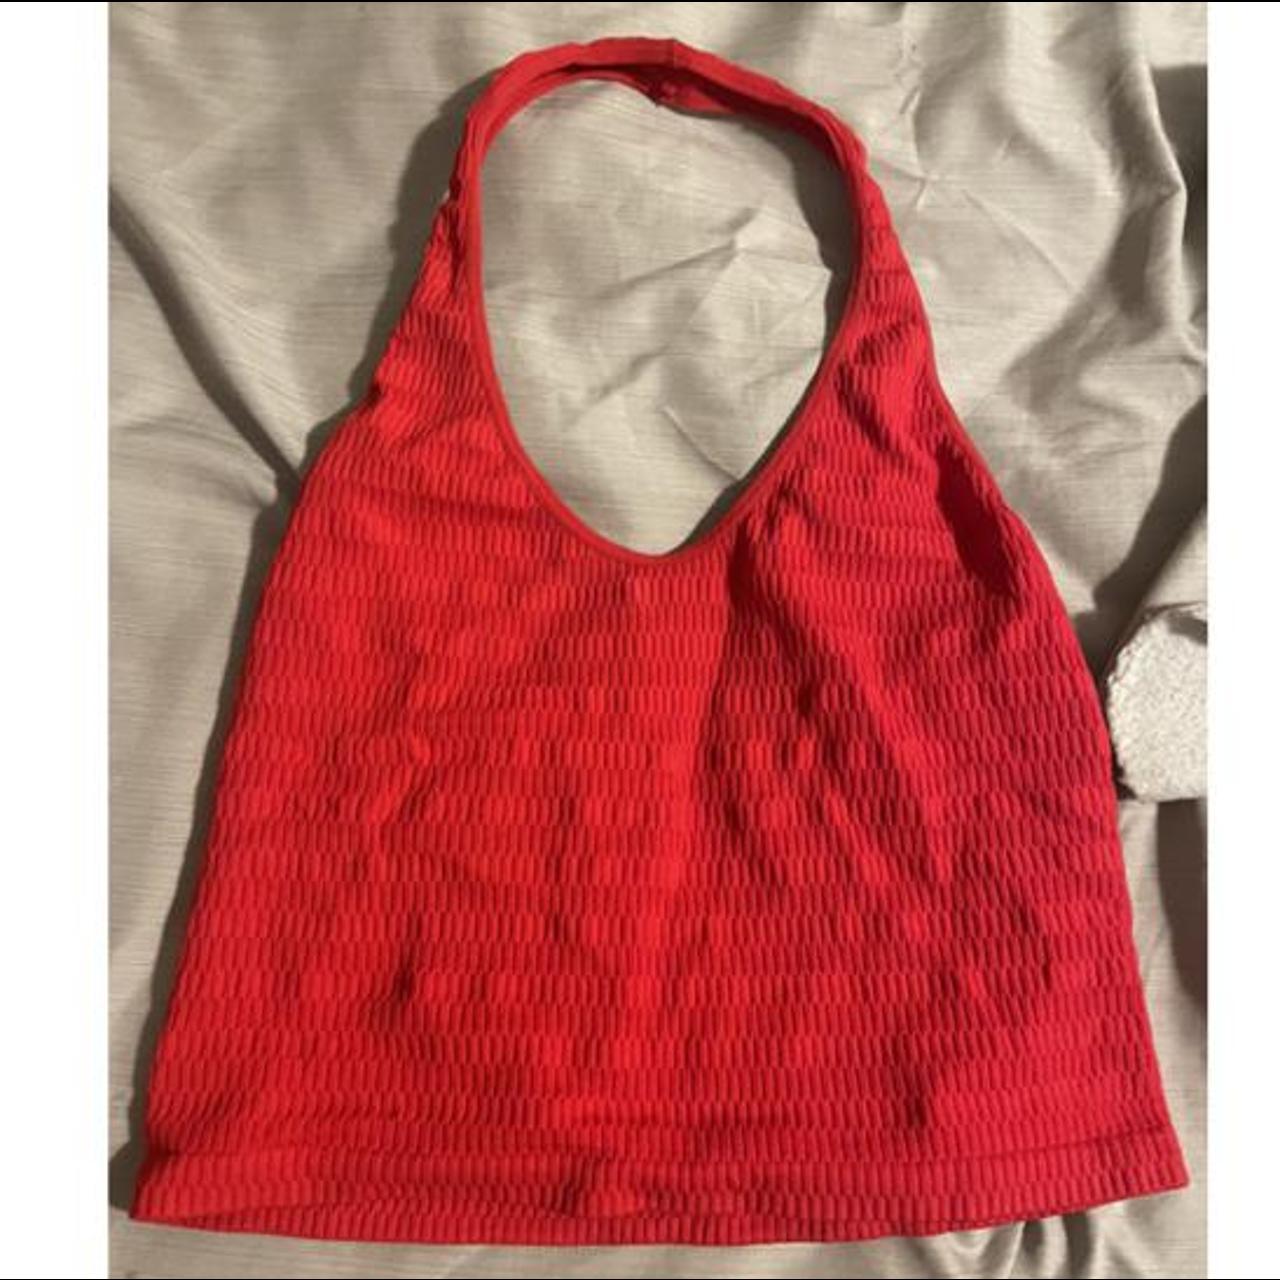 Product Image 1 - Red halter top❤️‍🔥 super soft